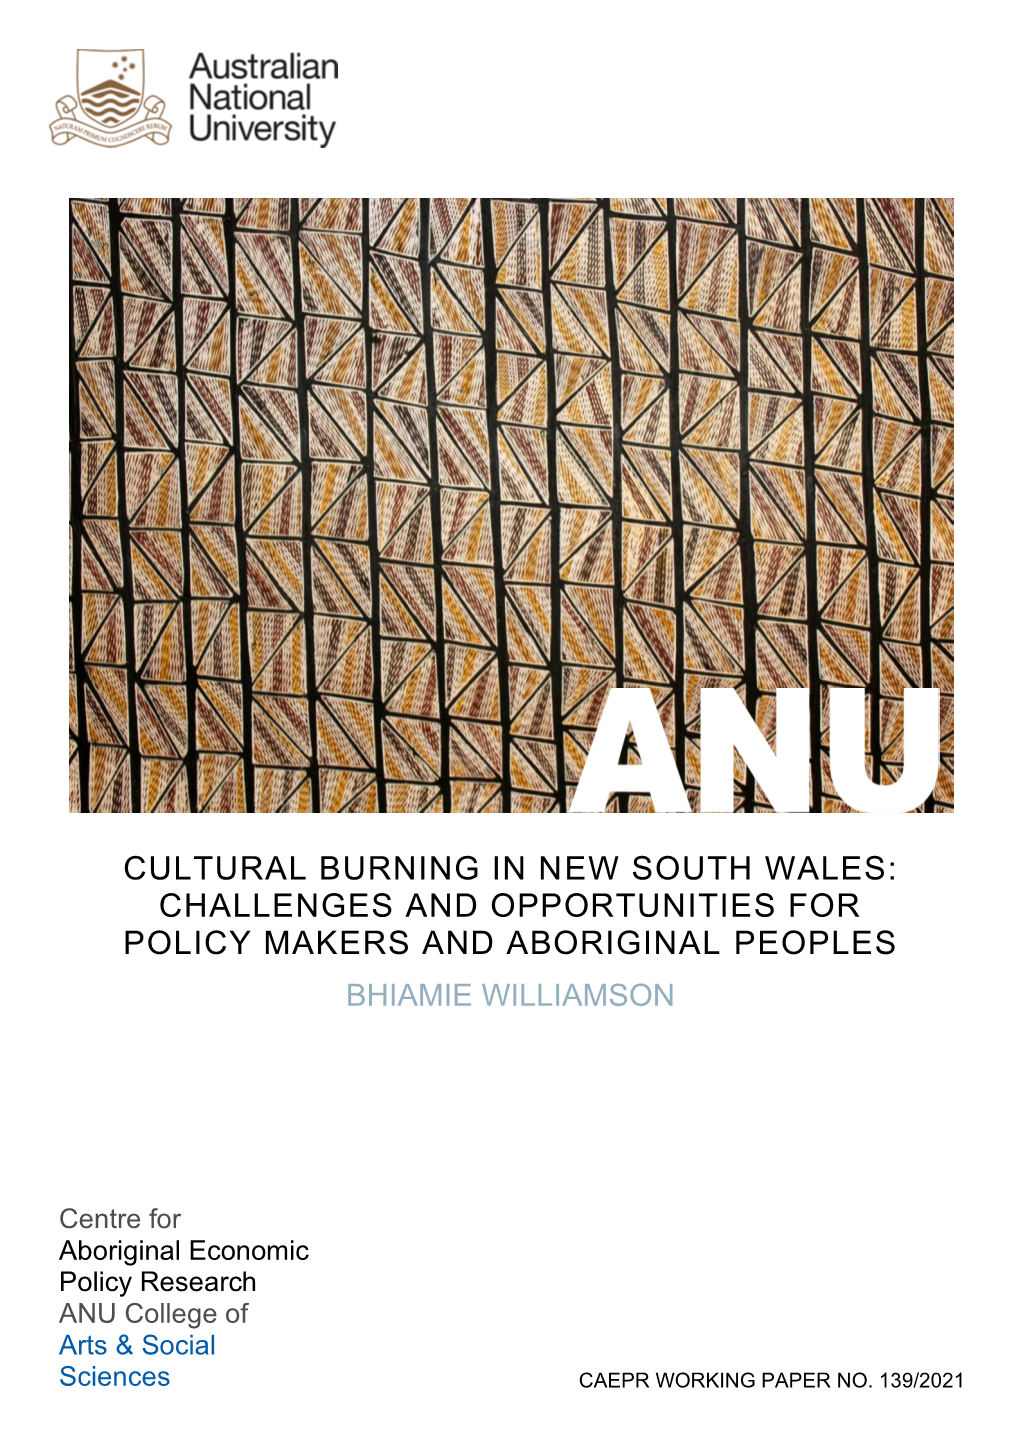 Cultural Burning in New South Wales: Challenges and Opportunities for Policy Makers and Aboriginal Peoples Bhiamie Williamson